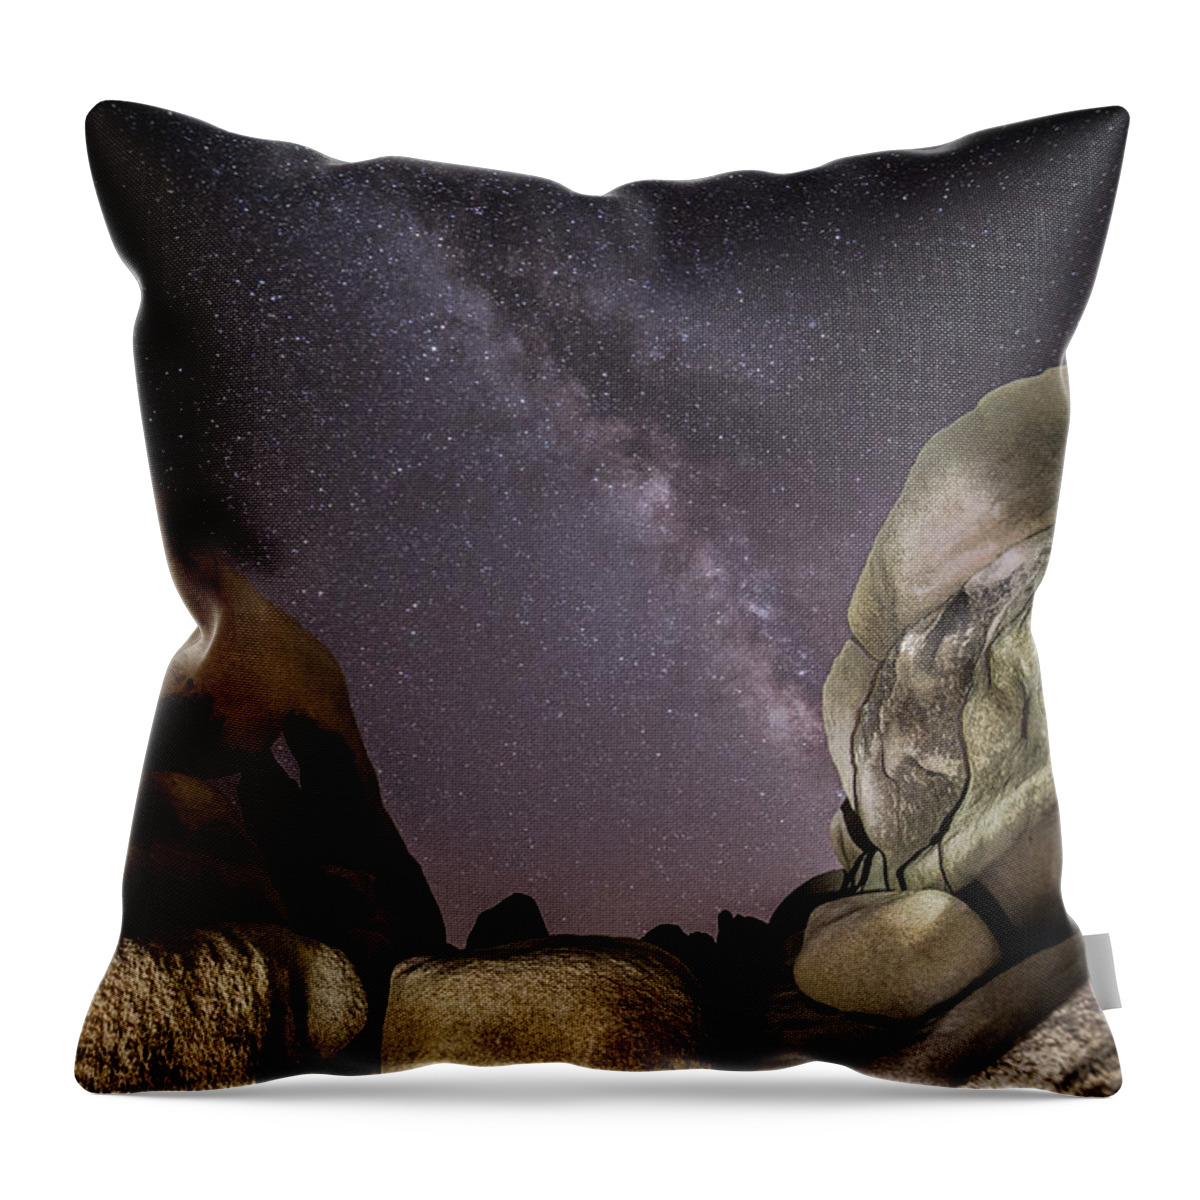 Astrophotography Throw Pillow featuring the photograph Illuminati V by Ryan Weddle